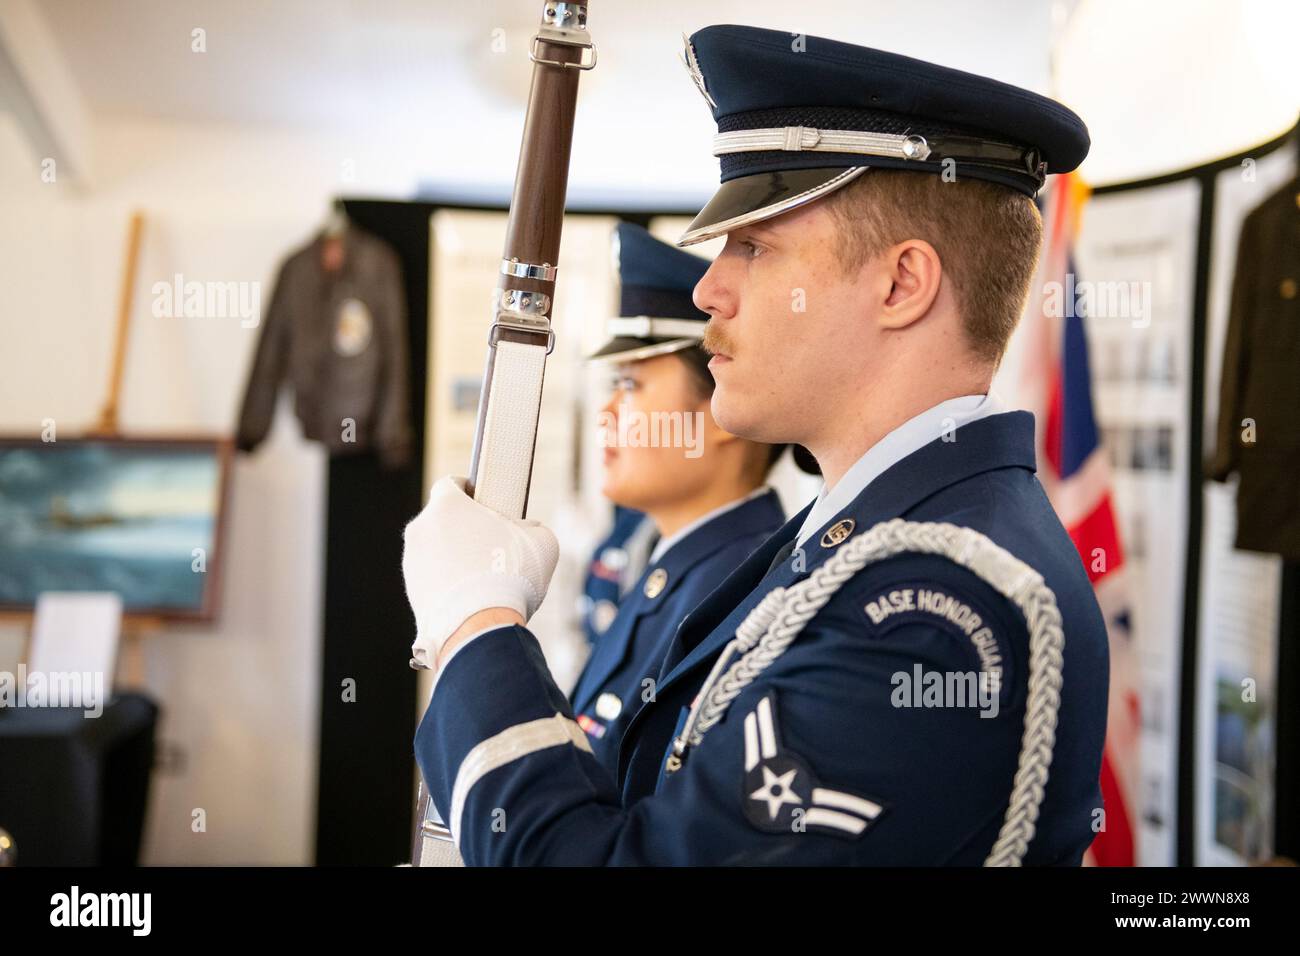 U.S. Air Force Airman 1st Class Spencer Eagan, right, 501st Combat Support Wing Honor Guard team member, presents the colors during a Ceremony of Remembrance at Stanwick Lakes, England, Feb. 22, 2024. U.S. and U.K. leaders gathered to honor 17 Airmen who died in a midair collision on Feb. 22, 1944, involving B-17 Flying Fortresses from the 303rd Bombardment Group at RAF Molesworth and the 384th Bombardment Group at RAF Grafton Underwood. The Airmen were part of Operation Argument, or 'The Big Week,' targeting enemy industrial sites and aircraft facilities in Central Europe to secure Allied air Stock Photo